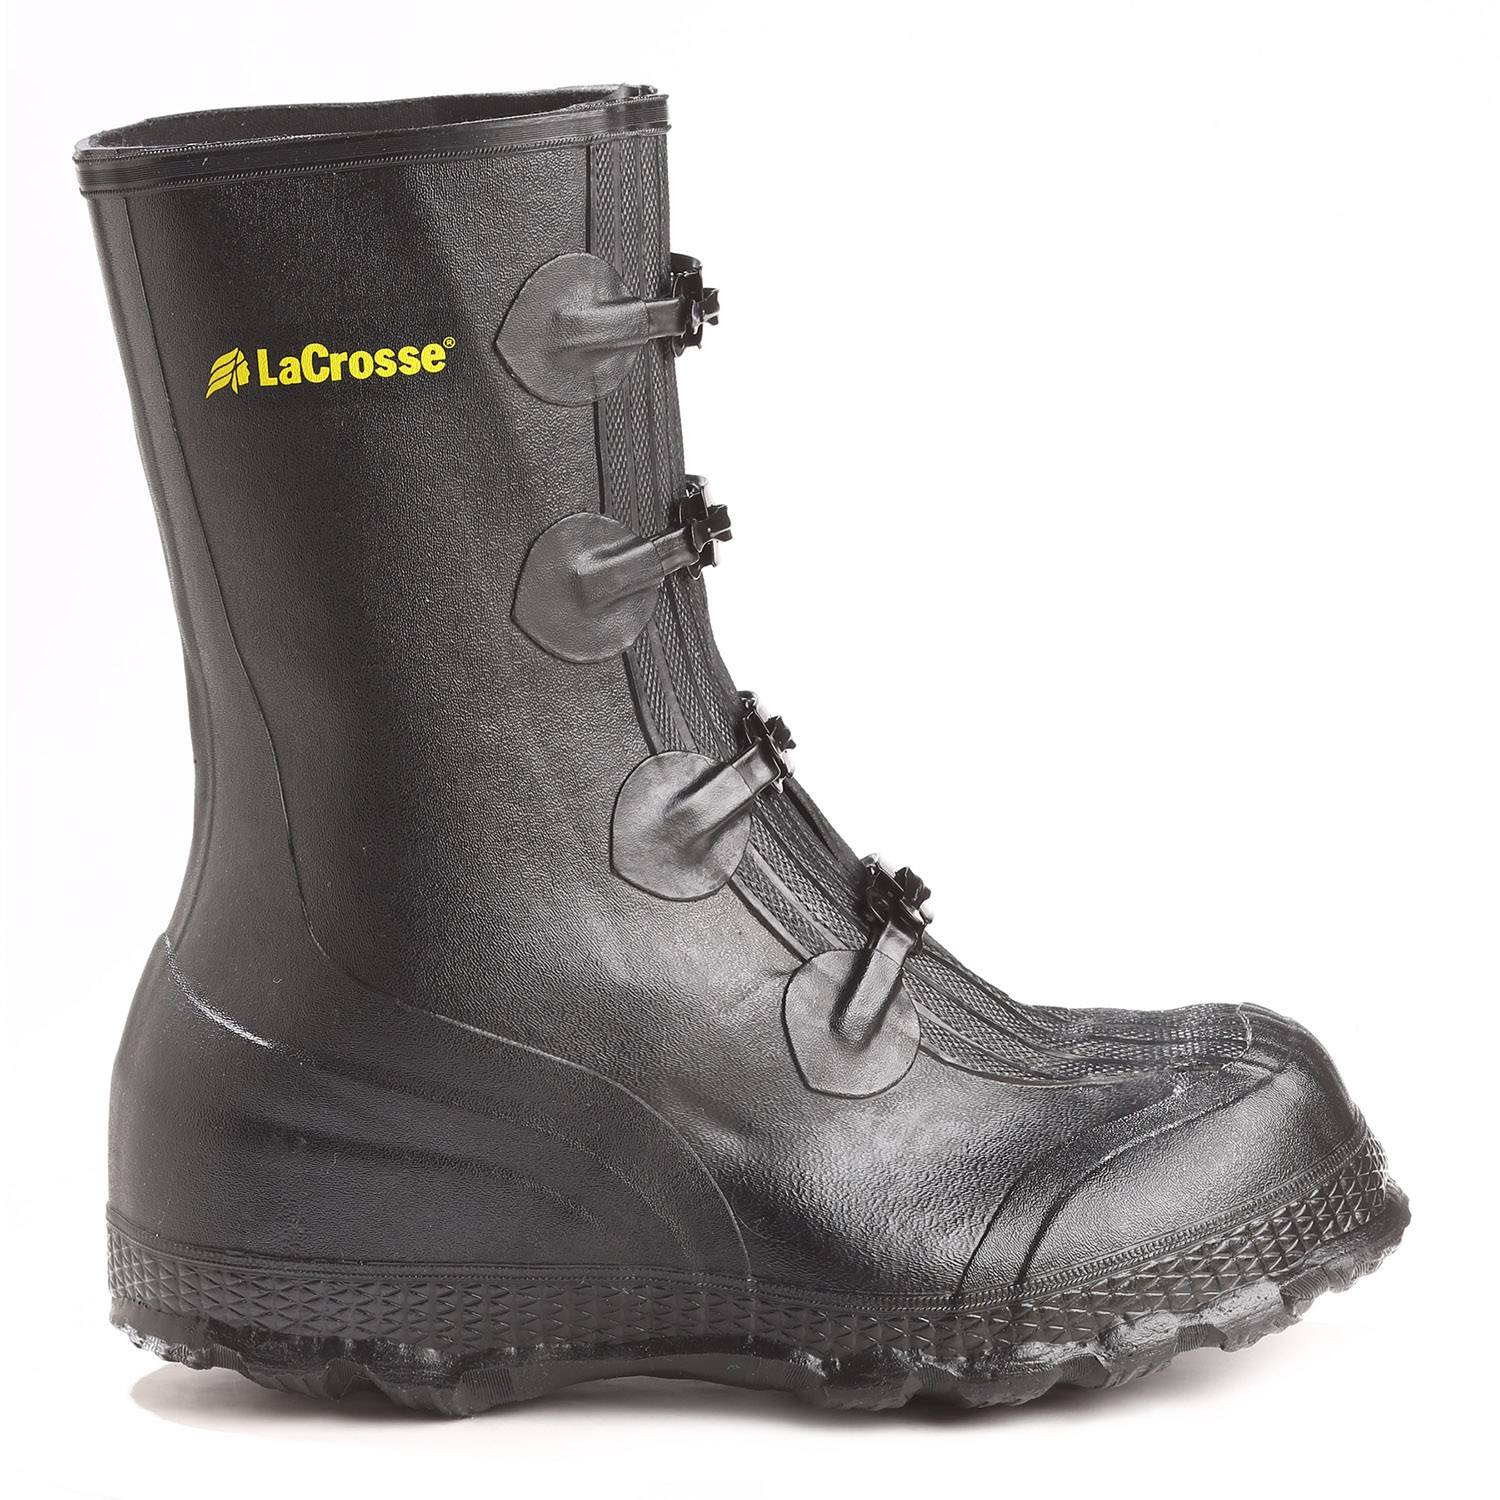 4 buckle rubber boots